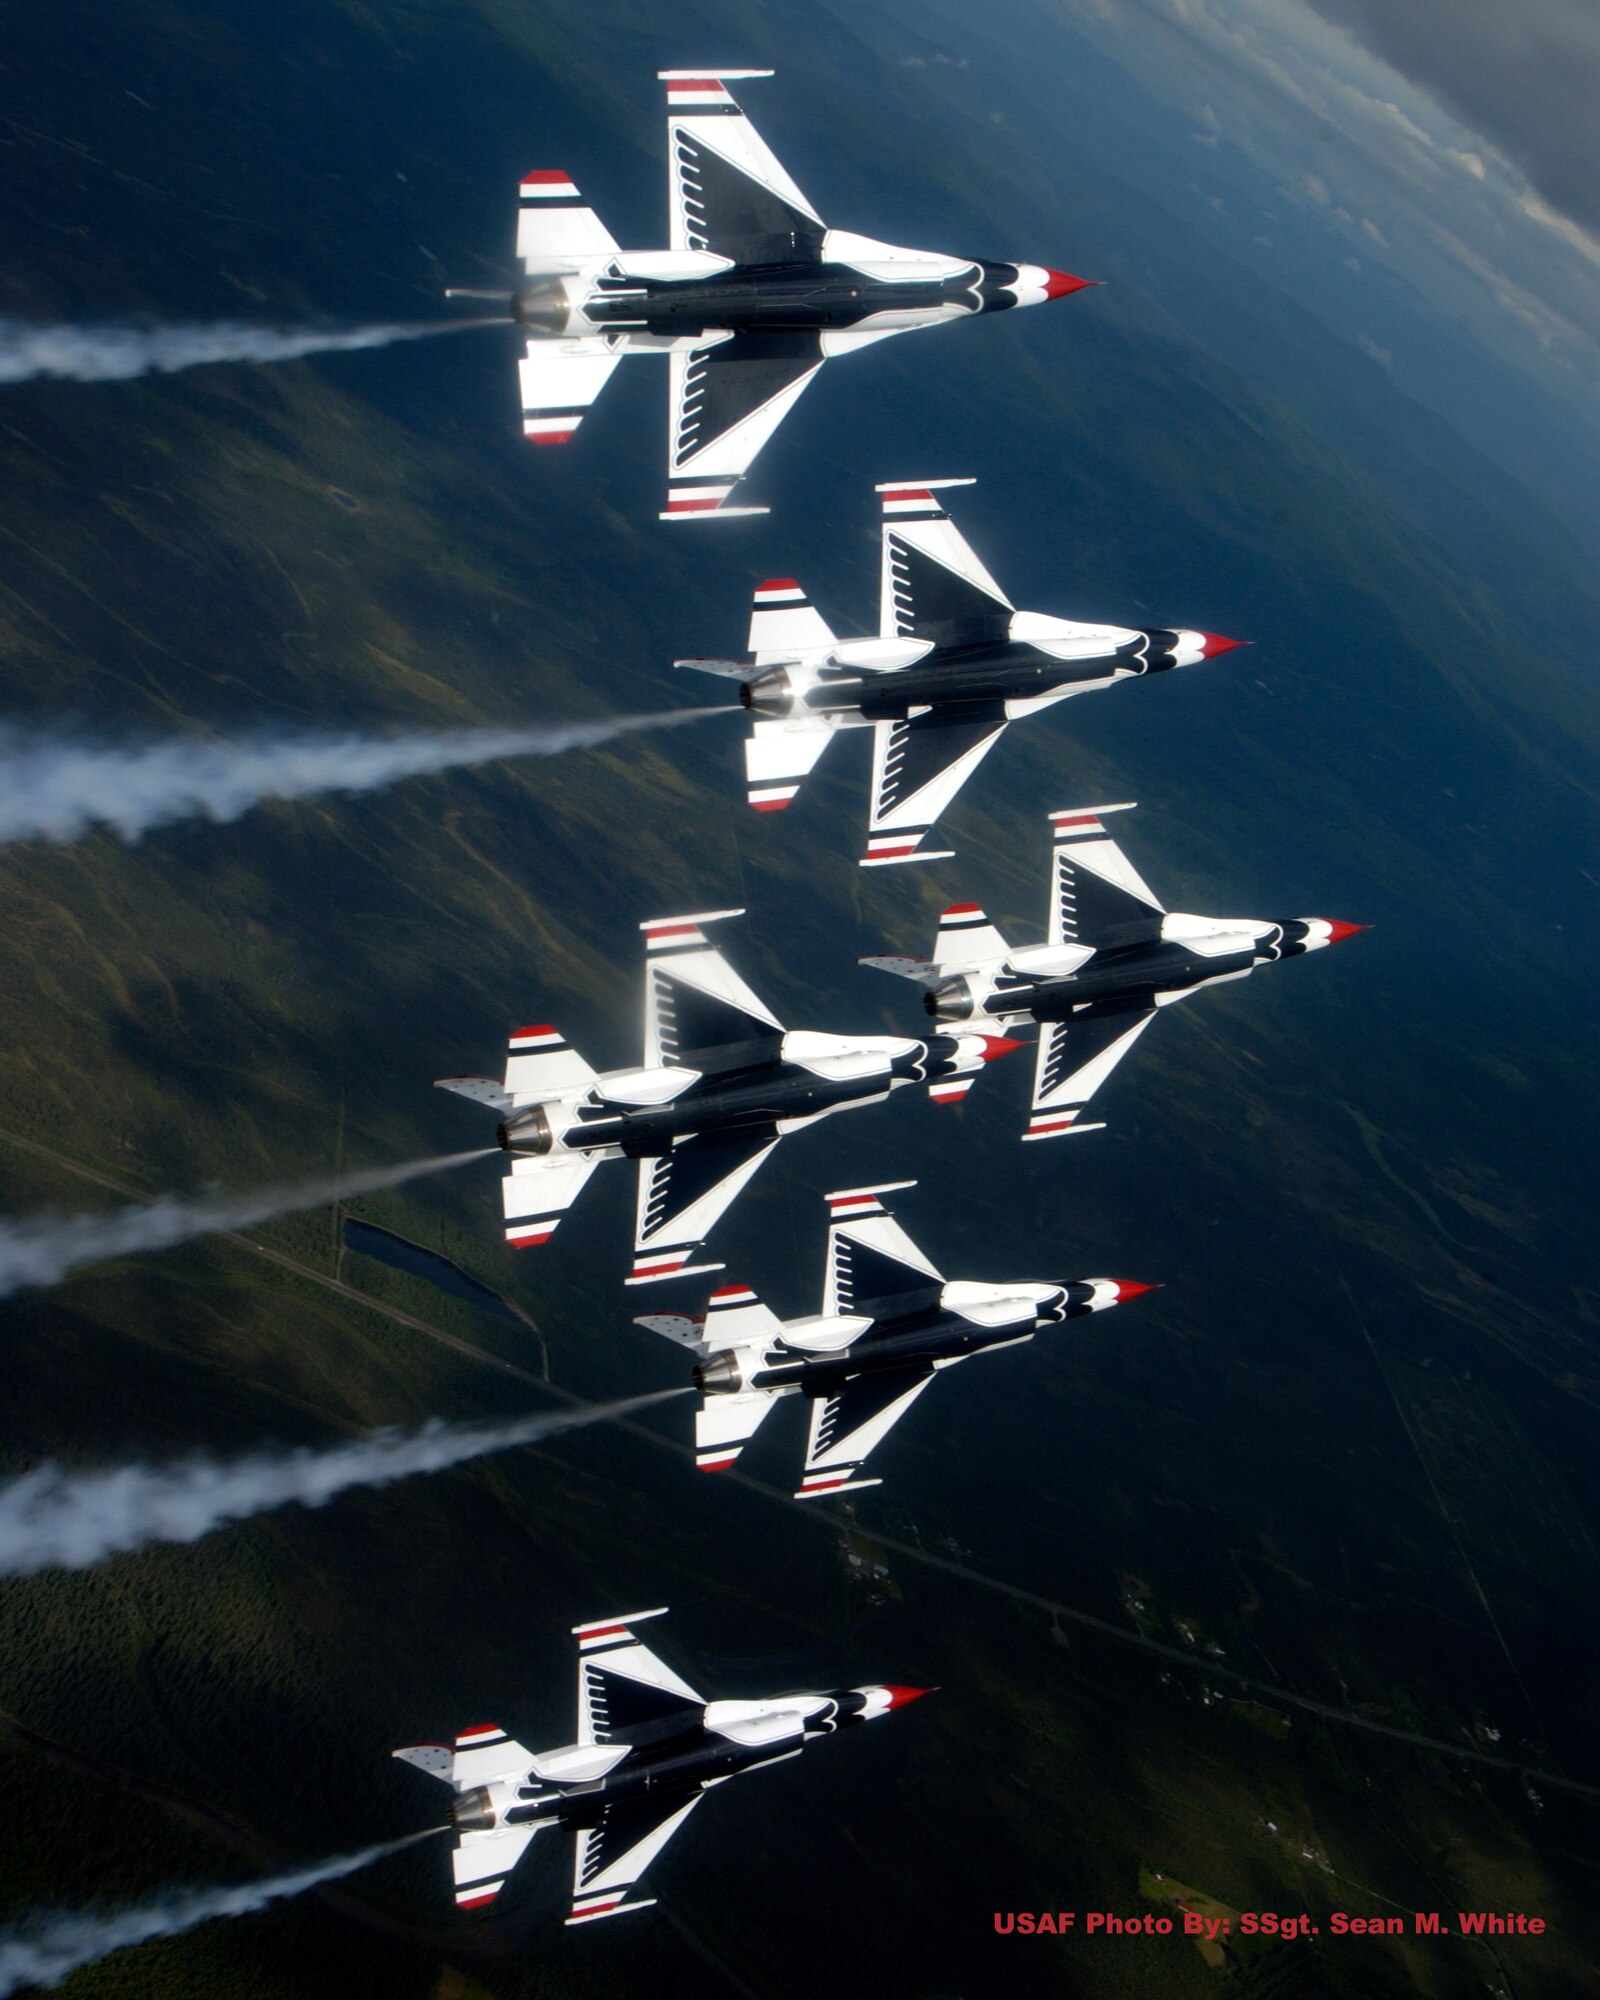 The U.S. Air Force Thunderbirds are set to perform at The Great New England Air Show at Westover ARB, Sept. 6-7.  The aerial demonstration team flies the F-16C fighter jet.  Also to be featured during the air show is the U.S. Navy's F-18 aerial demonstration team, The U.S. Air Force Academy's Glider team, the U.S. Army's Golden Knights Parachute team as well as fly overs by various other aircraft.  The air show is free and open to the public.  Gates open at 9:00 a.m. both Saturday and Sunday.      